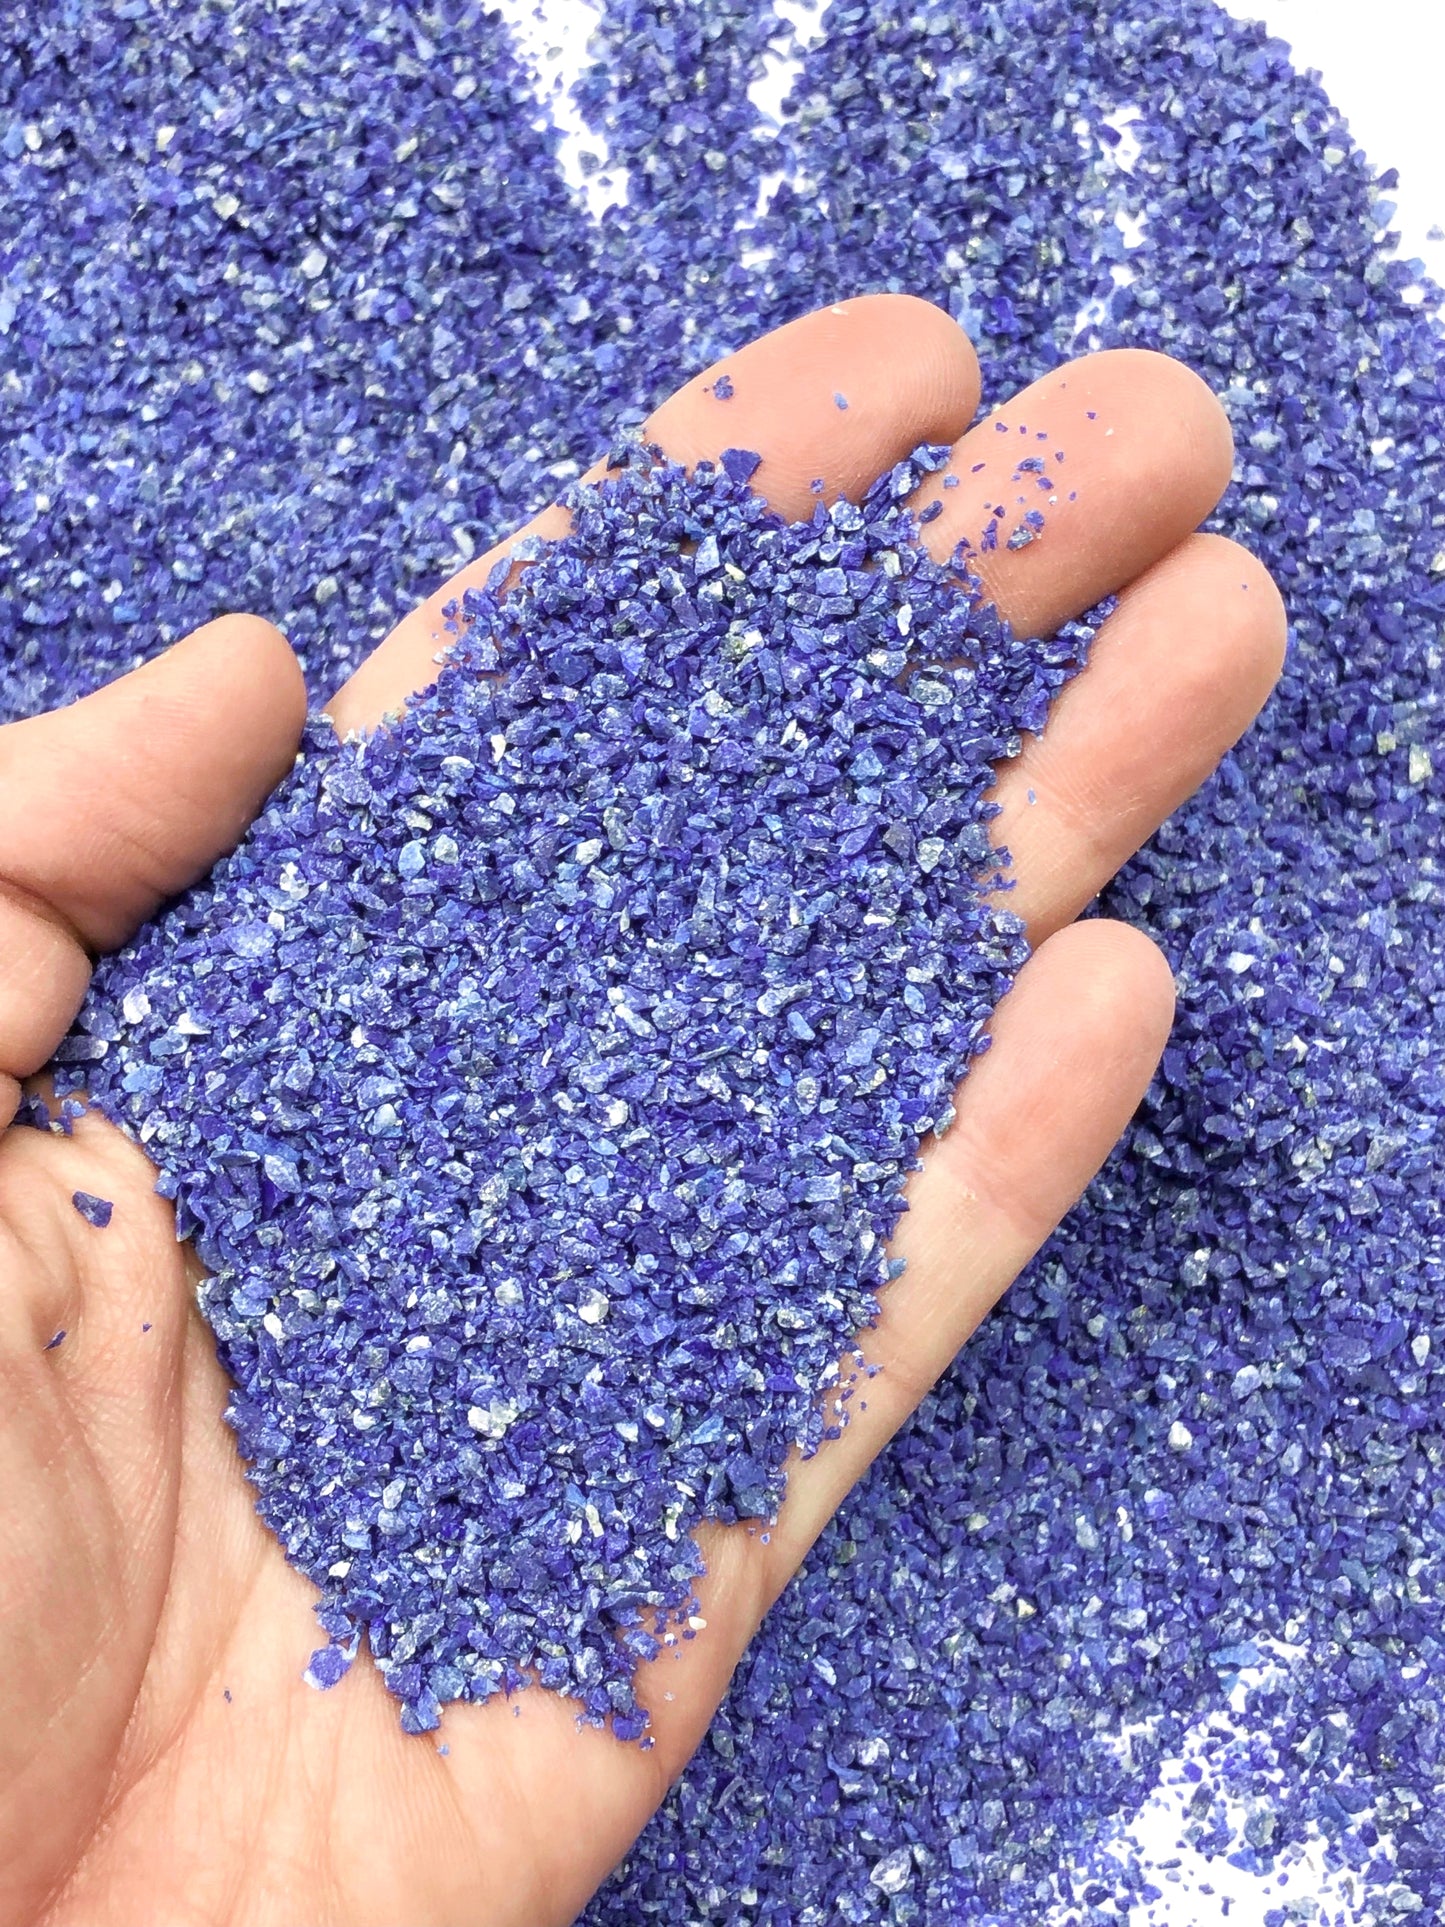 Crushed Royal Blue Lapis Lazuli (Grade AAA) from Afghanistan, Medium Crush, Sand Size, 2mm - 0.25mm